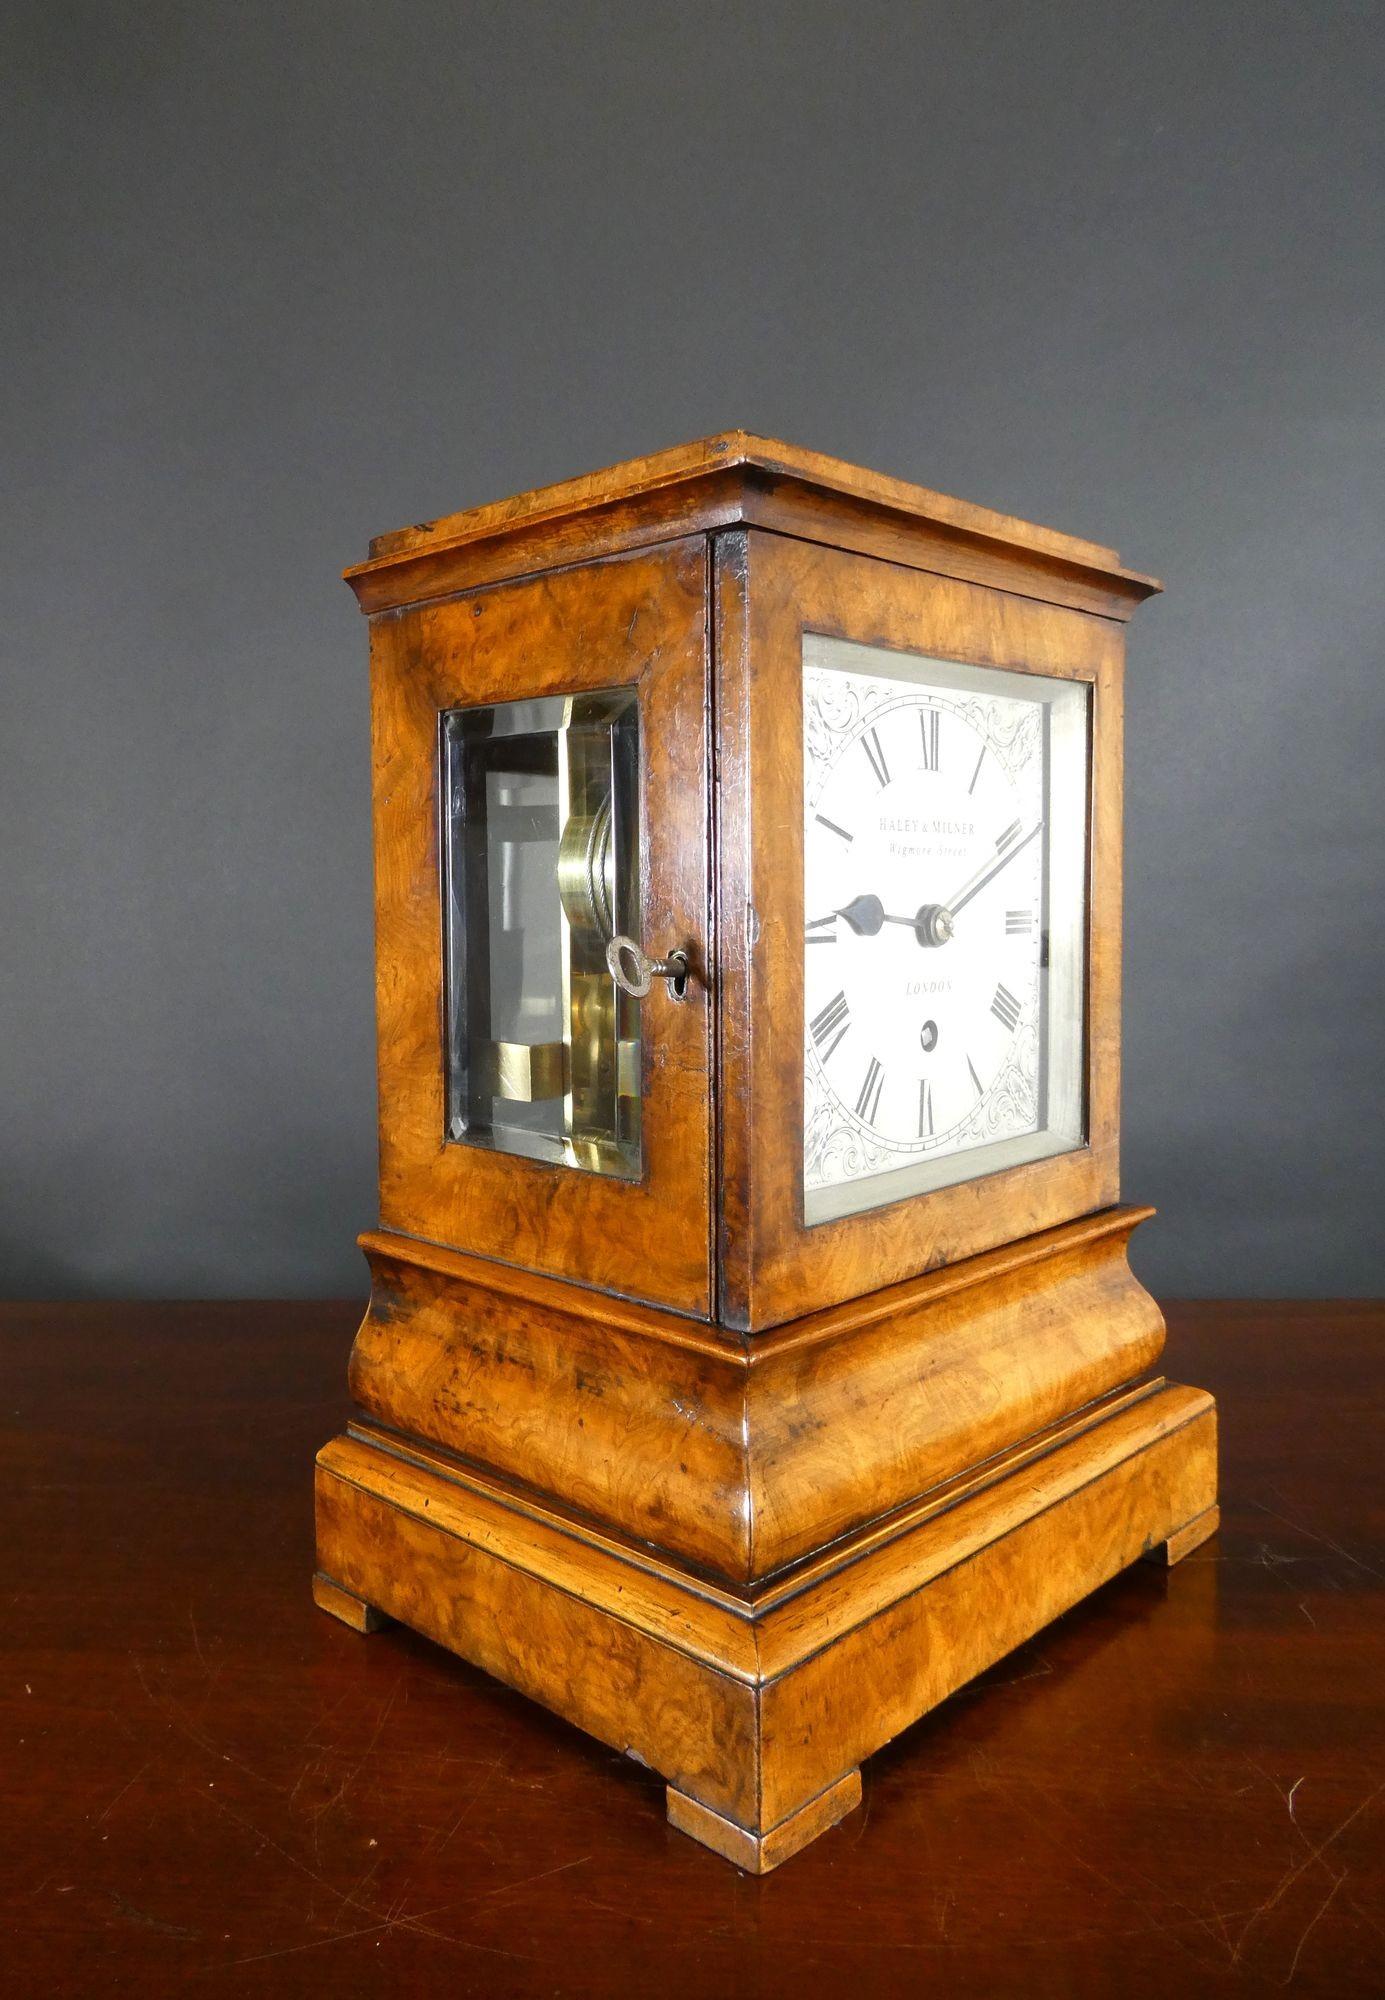 Walnut Library Bracket Clock, Haley & Milner, London
Finely figured walnut 5 glass case with moulded plinth and standing on pad feet with bevelled glass throughout.
Front opening door revealing the silvered dial with Roman numerals, finely engraved